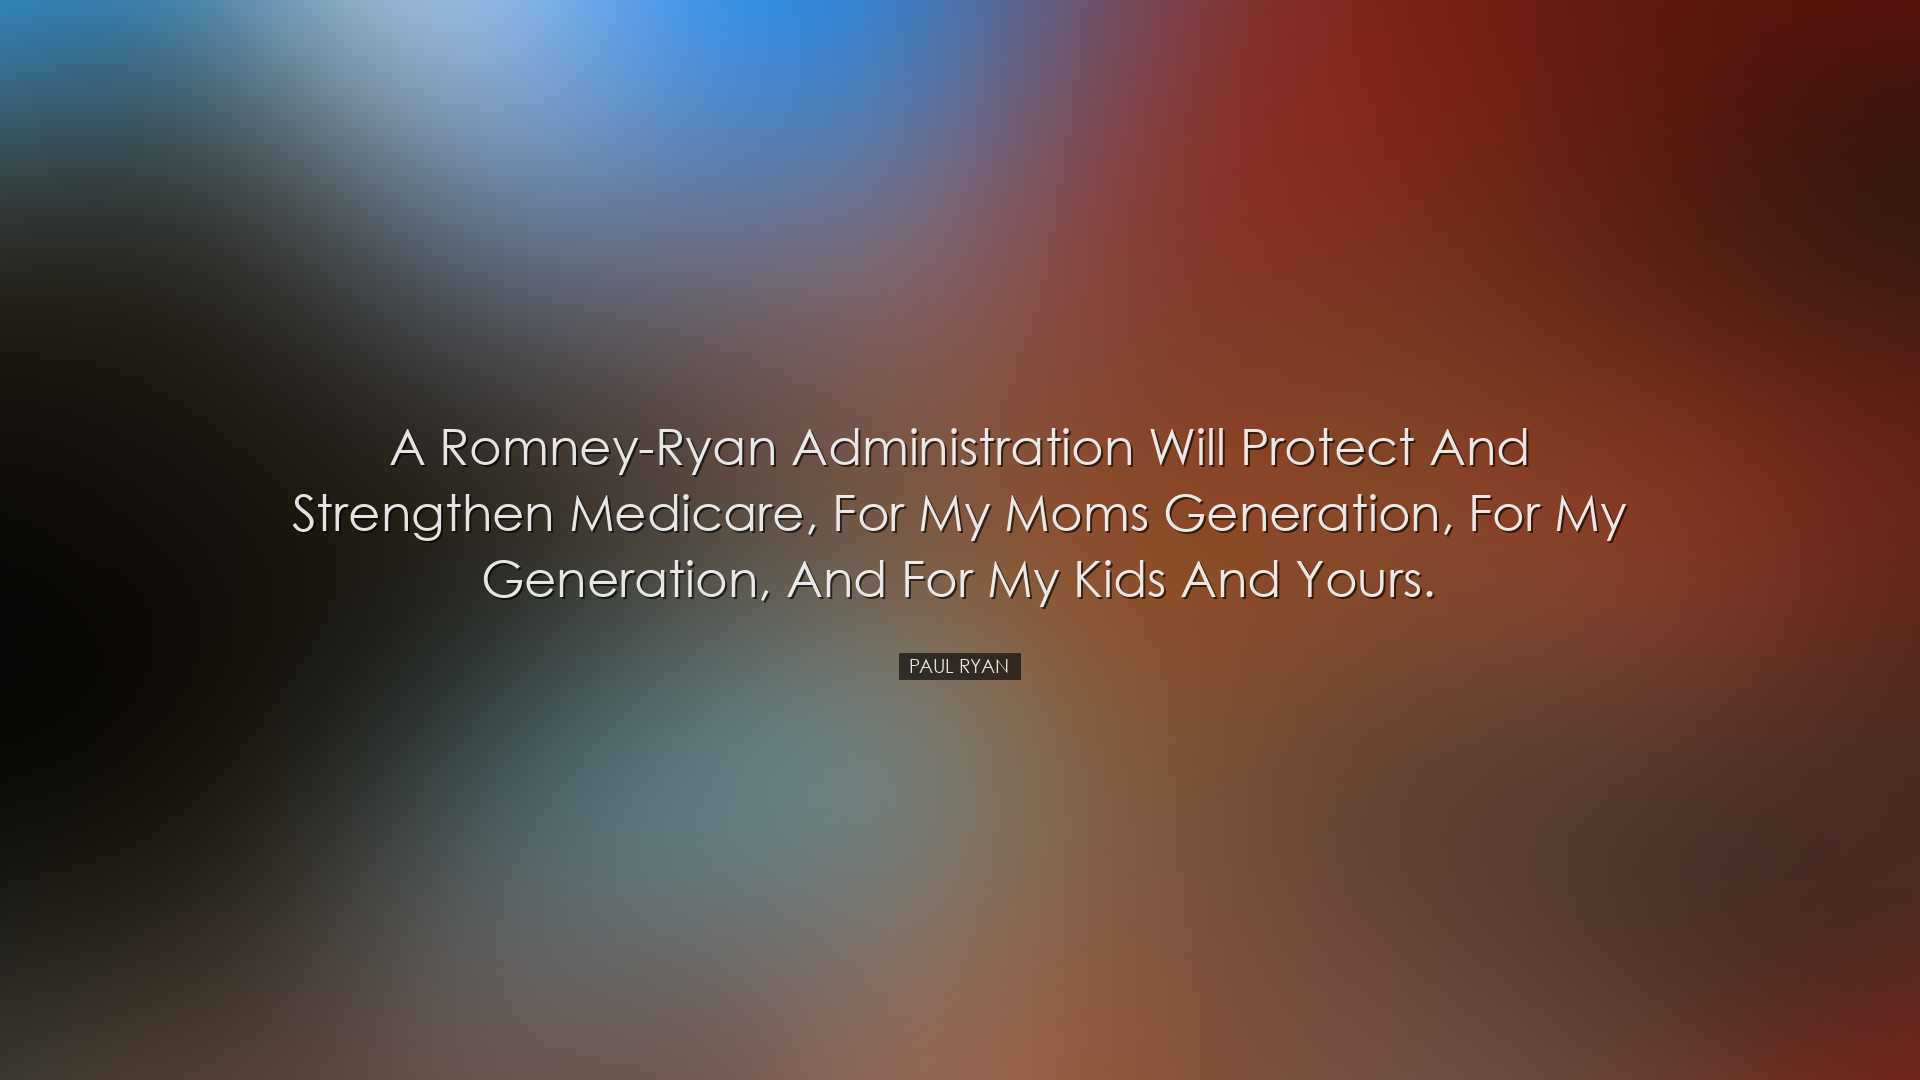 A Romney-Ryan administration will protect and strengthen Medicare,